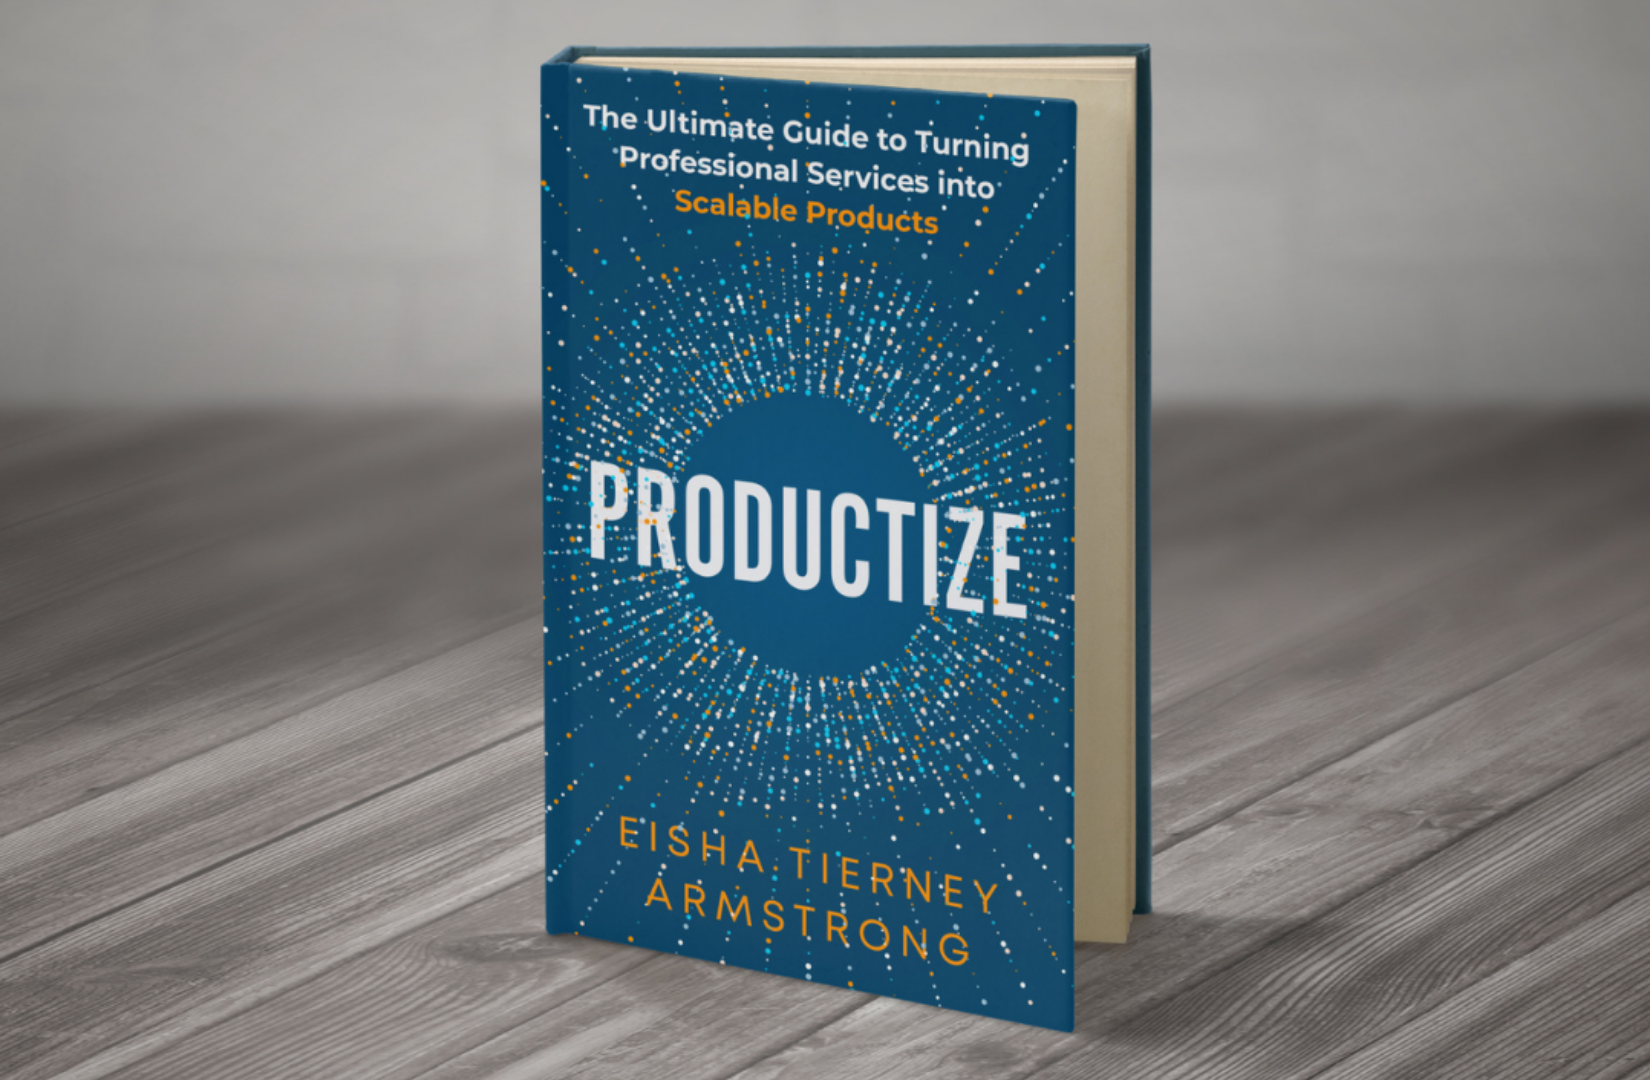 BLOG-Sneak Peek At New Book For Professional Services Firms- PRODUCTIZE